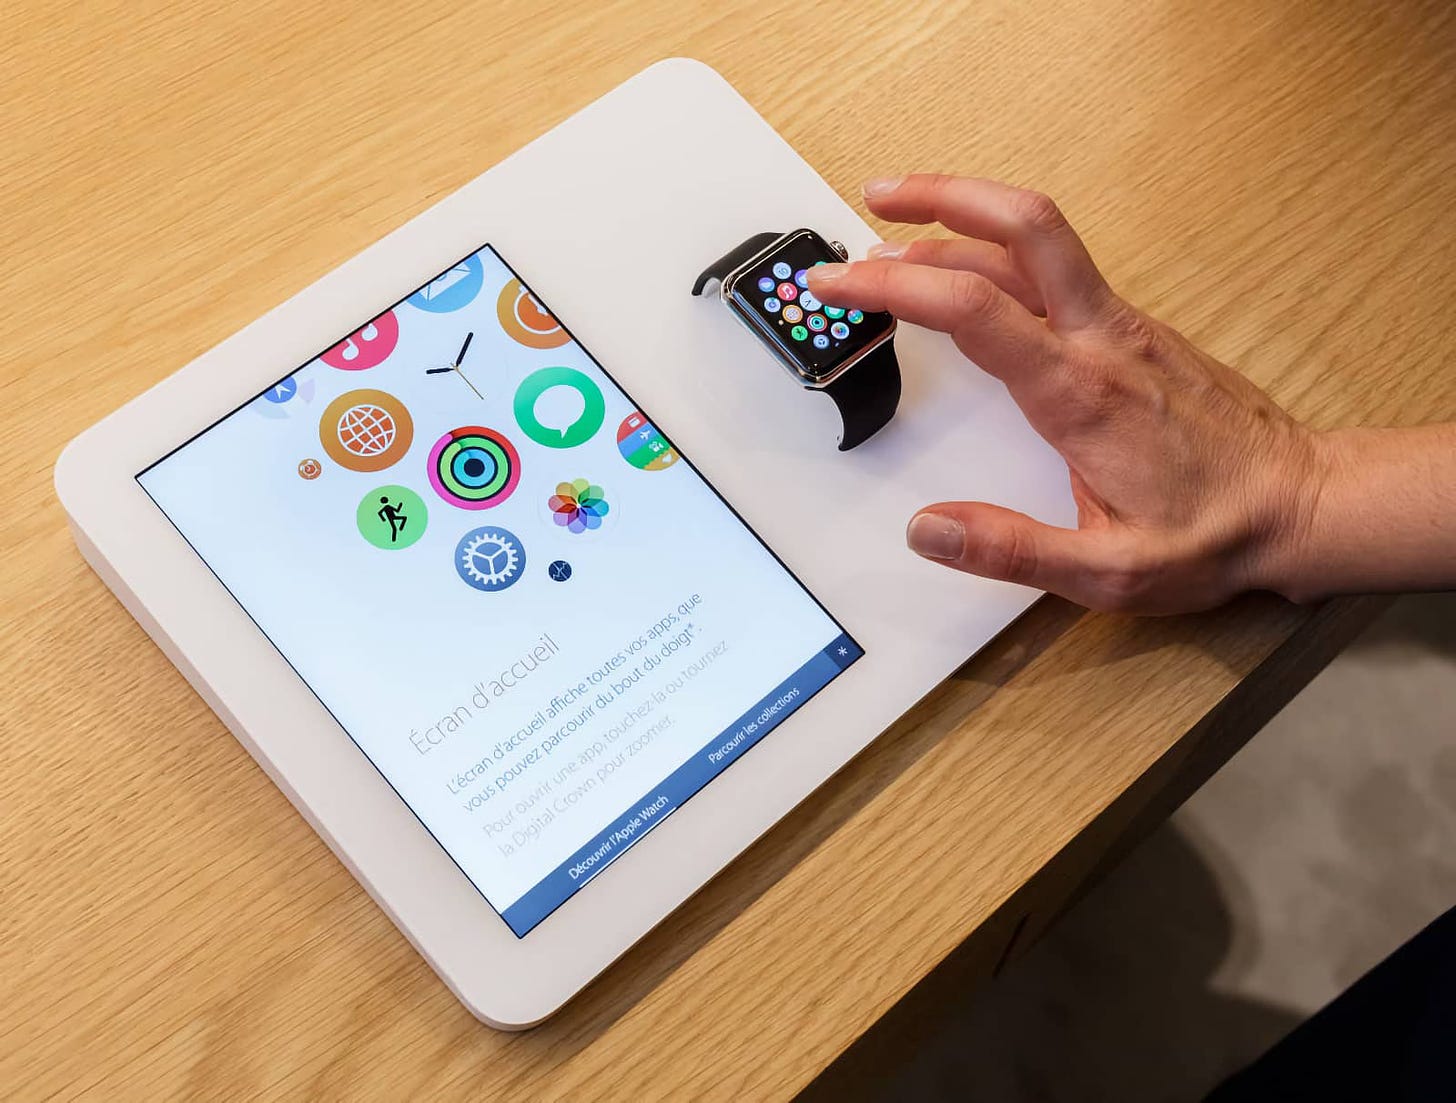 An Apple Watch Demo display at an Apple Watch shop. watchOS features are displayed on the screen of an iPad mini.